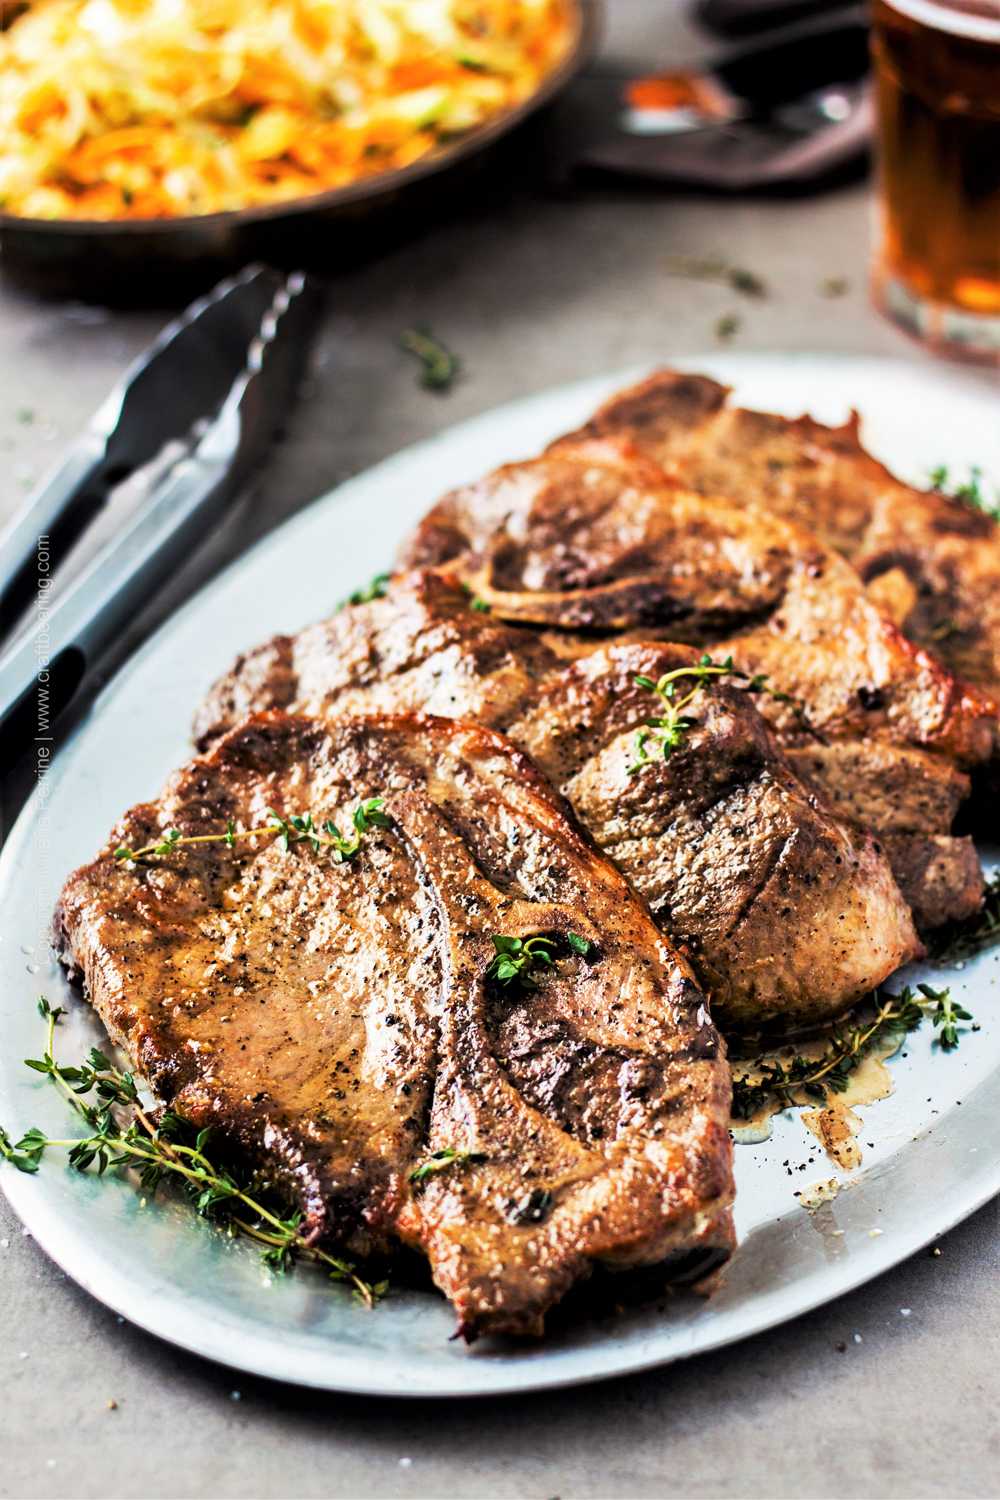 Oven baked pork steaks (with shoulder blade visible), marinated and well seasoned. 